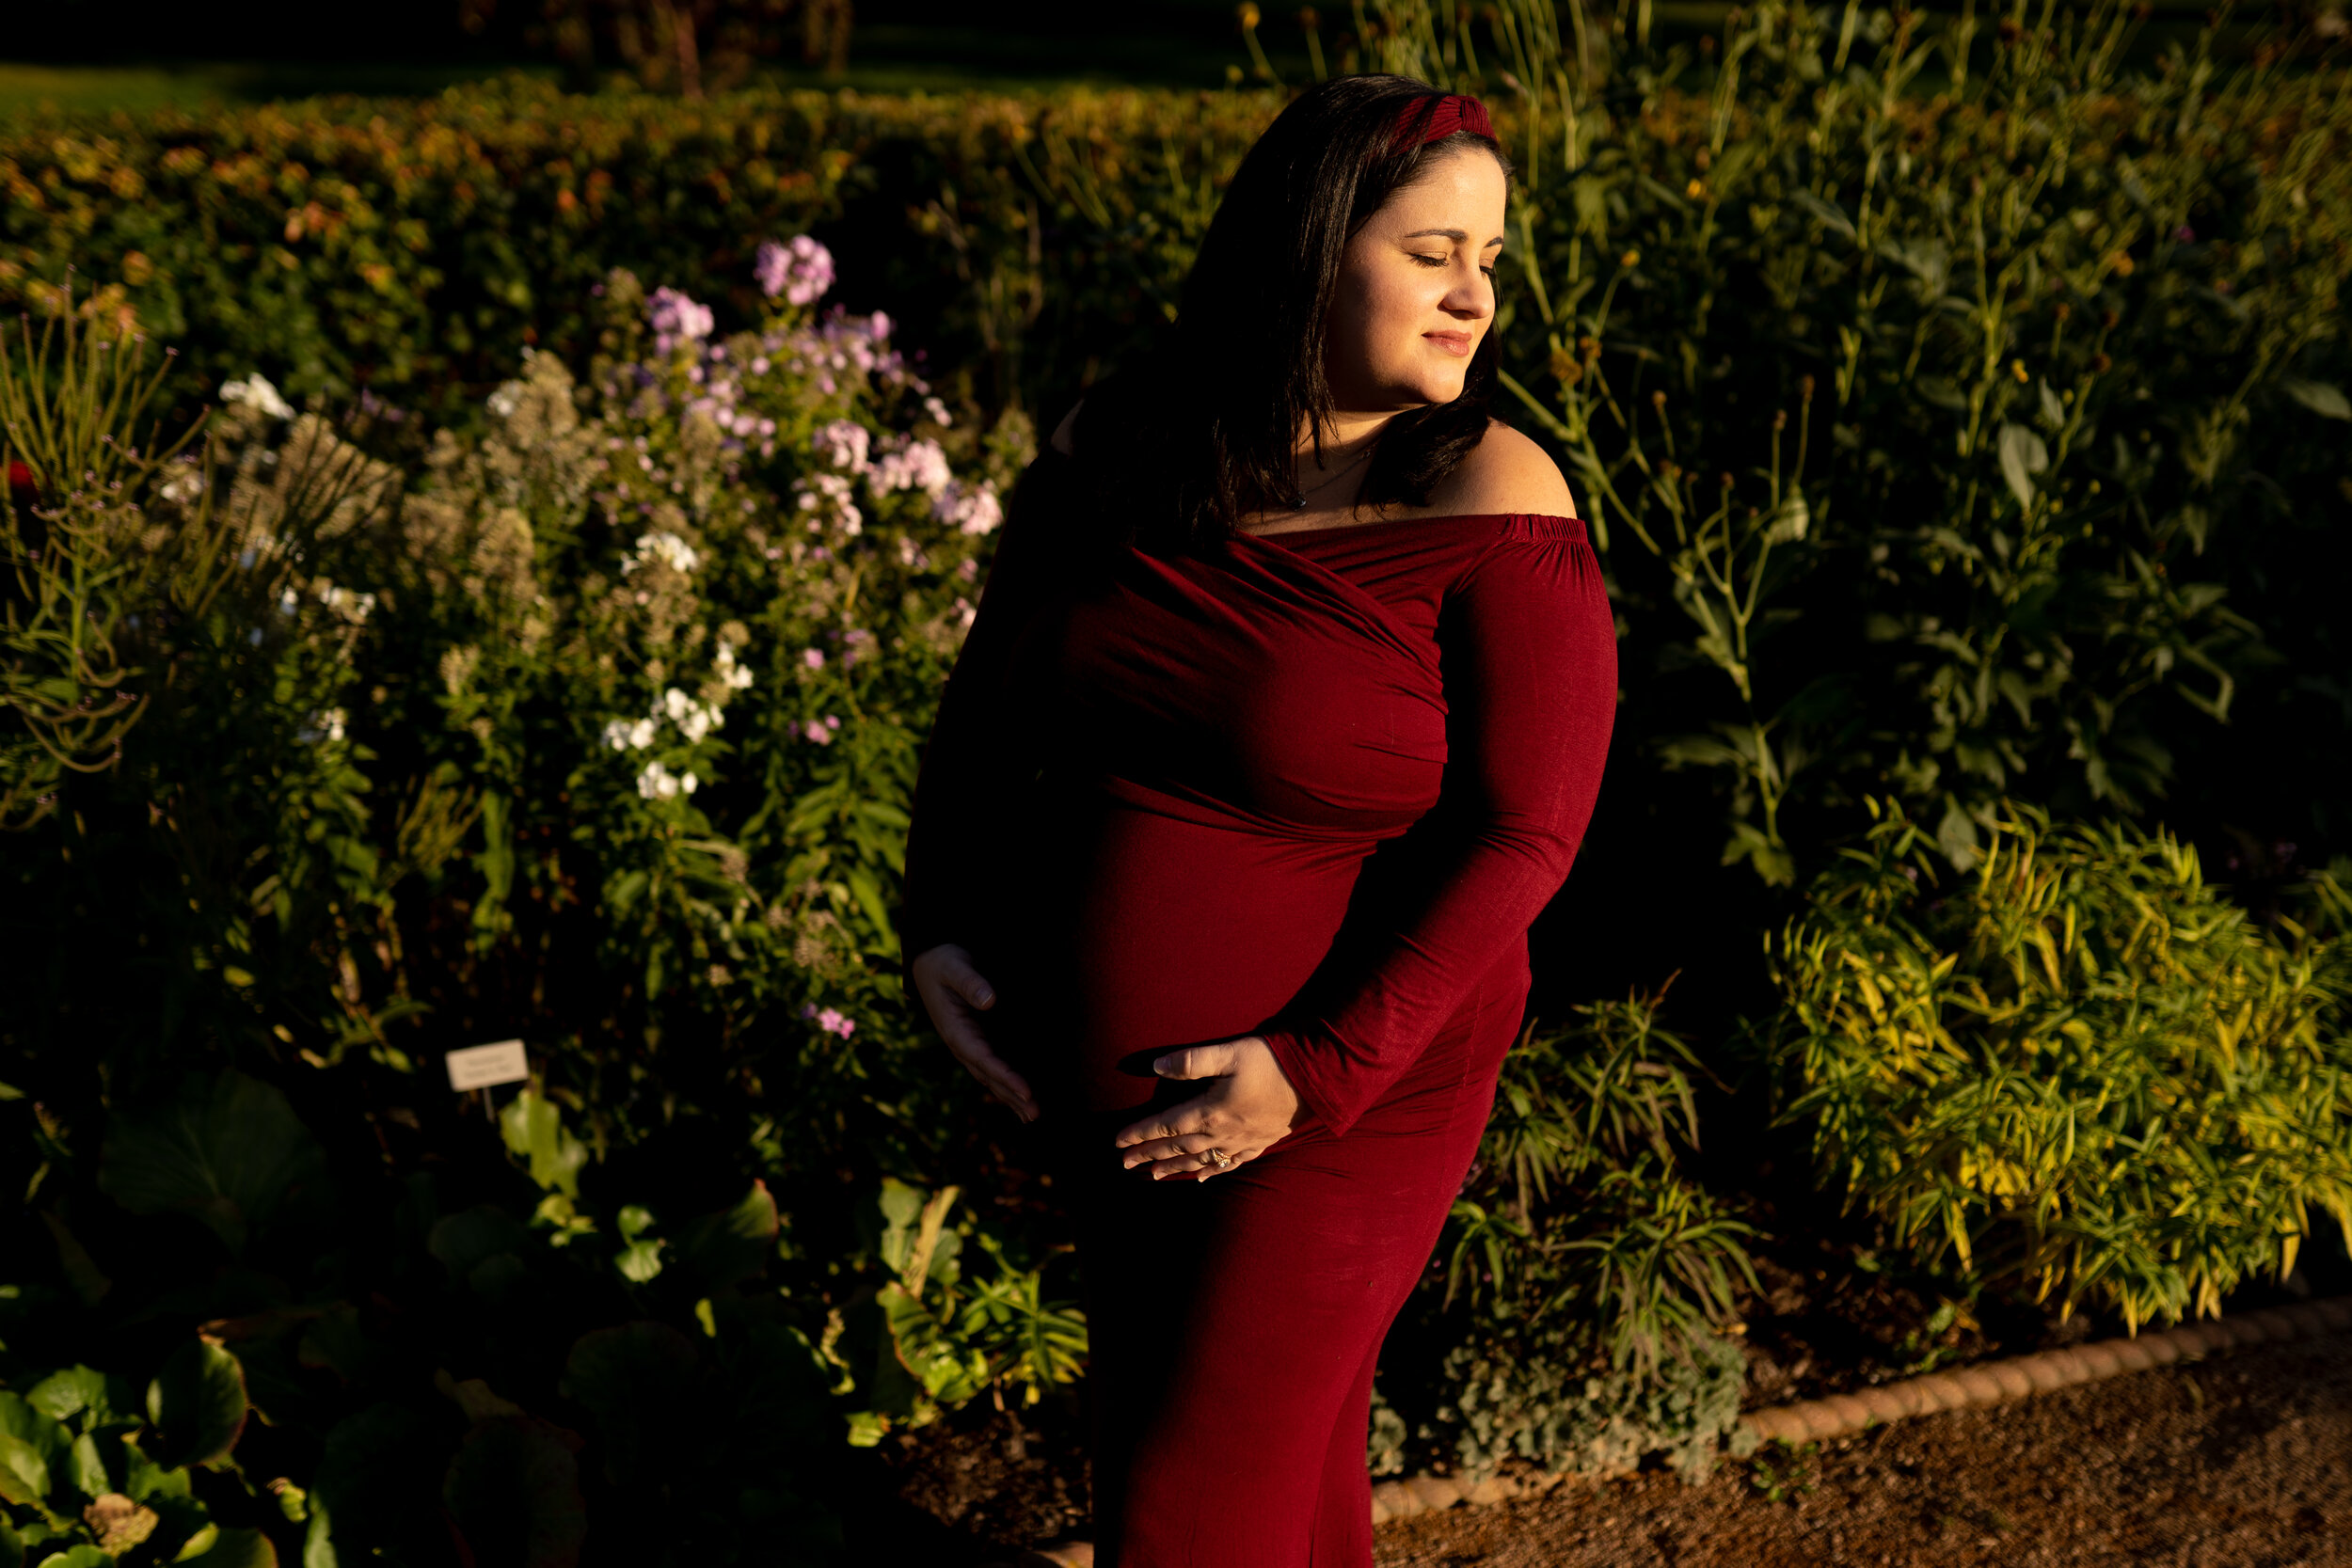 Mother to be wearing a stunning red dress posed at a Minneapolis botanical garden